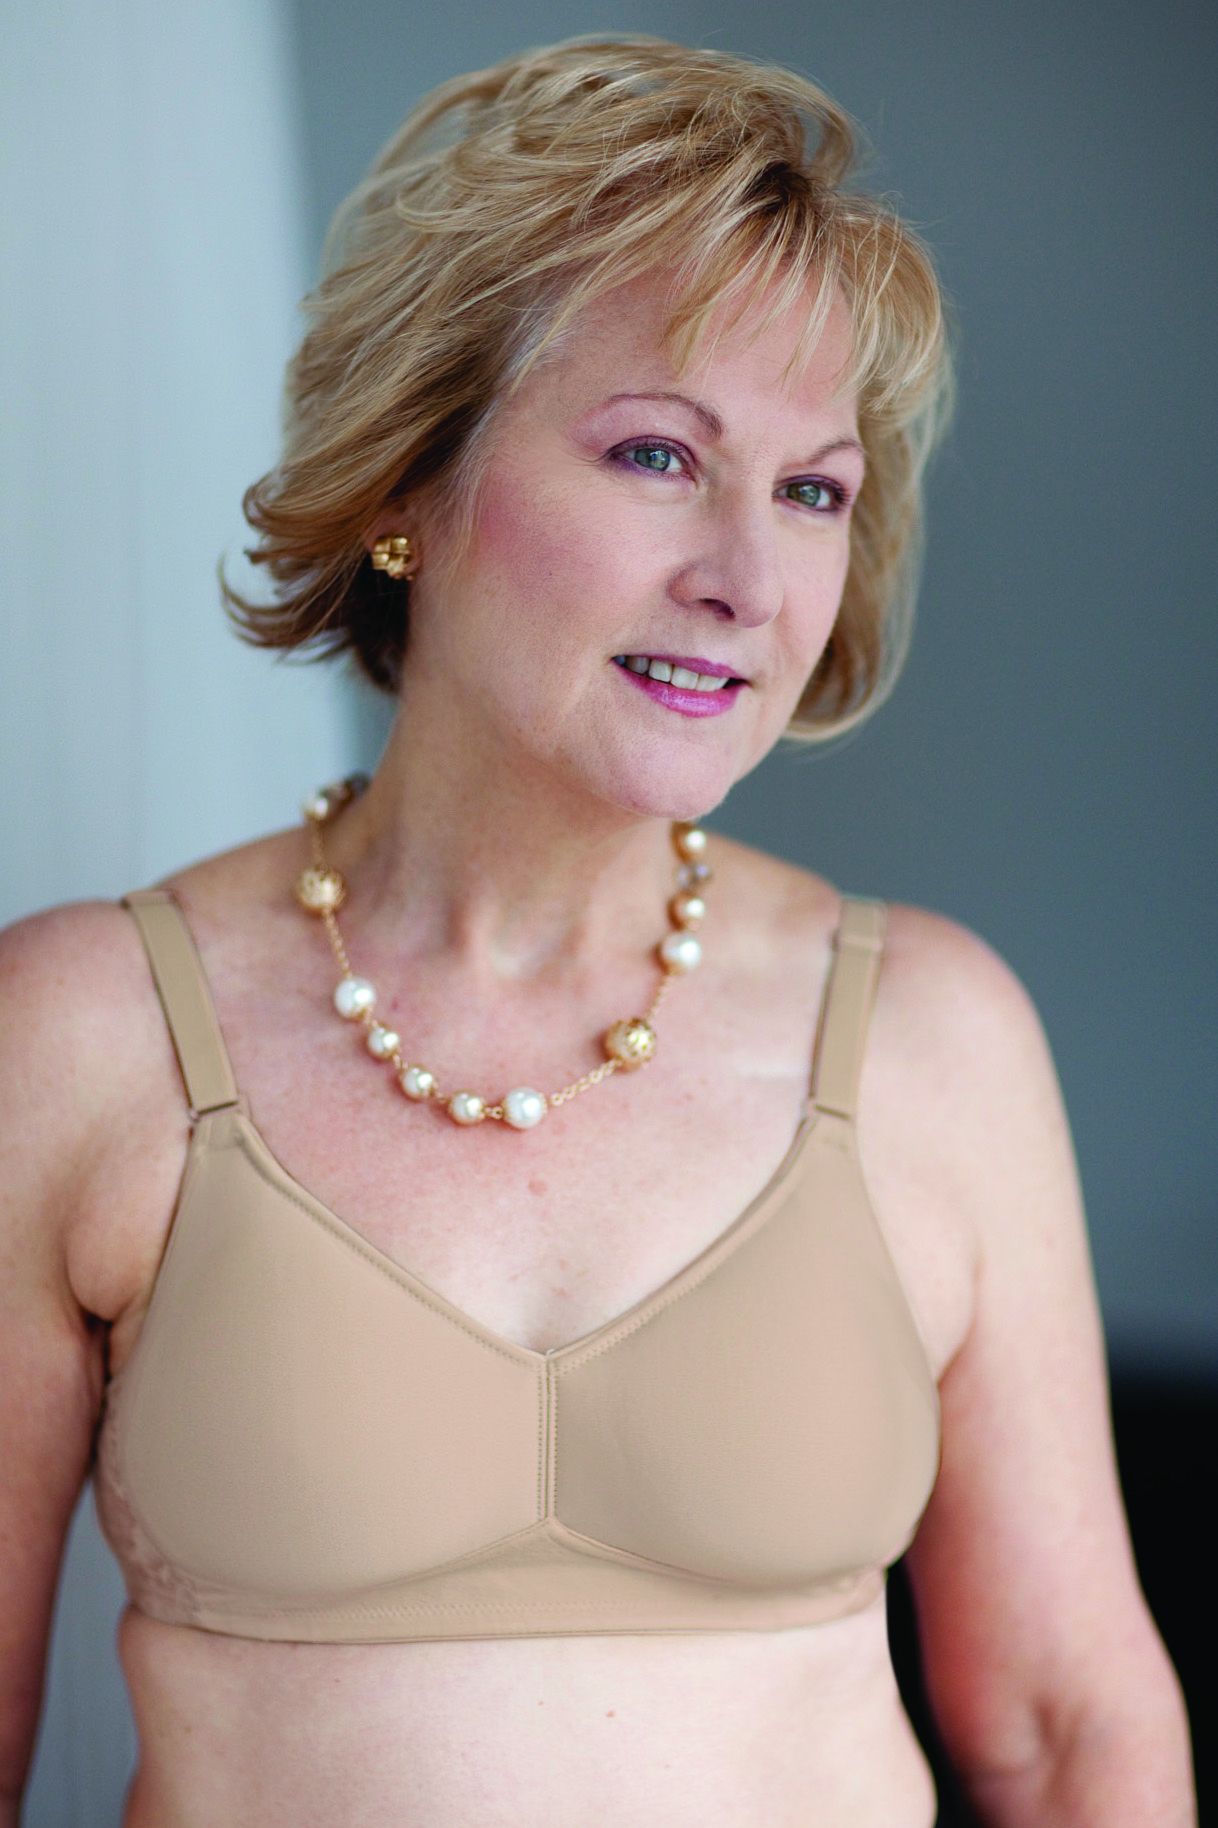 Seamless Mastectomy Bra For Women Breast Prosthesis With Pockets